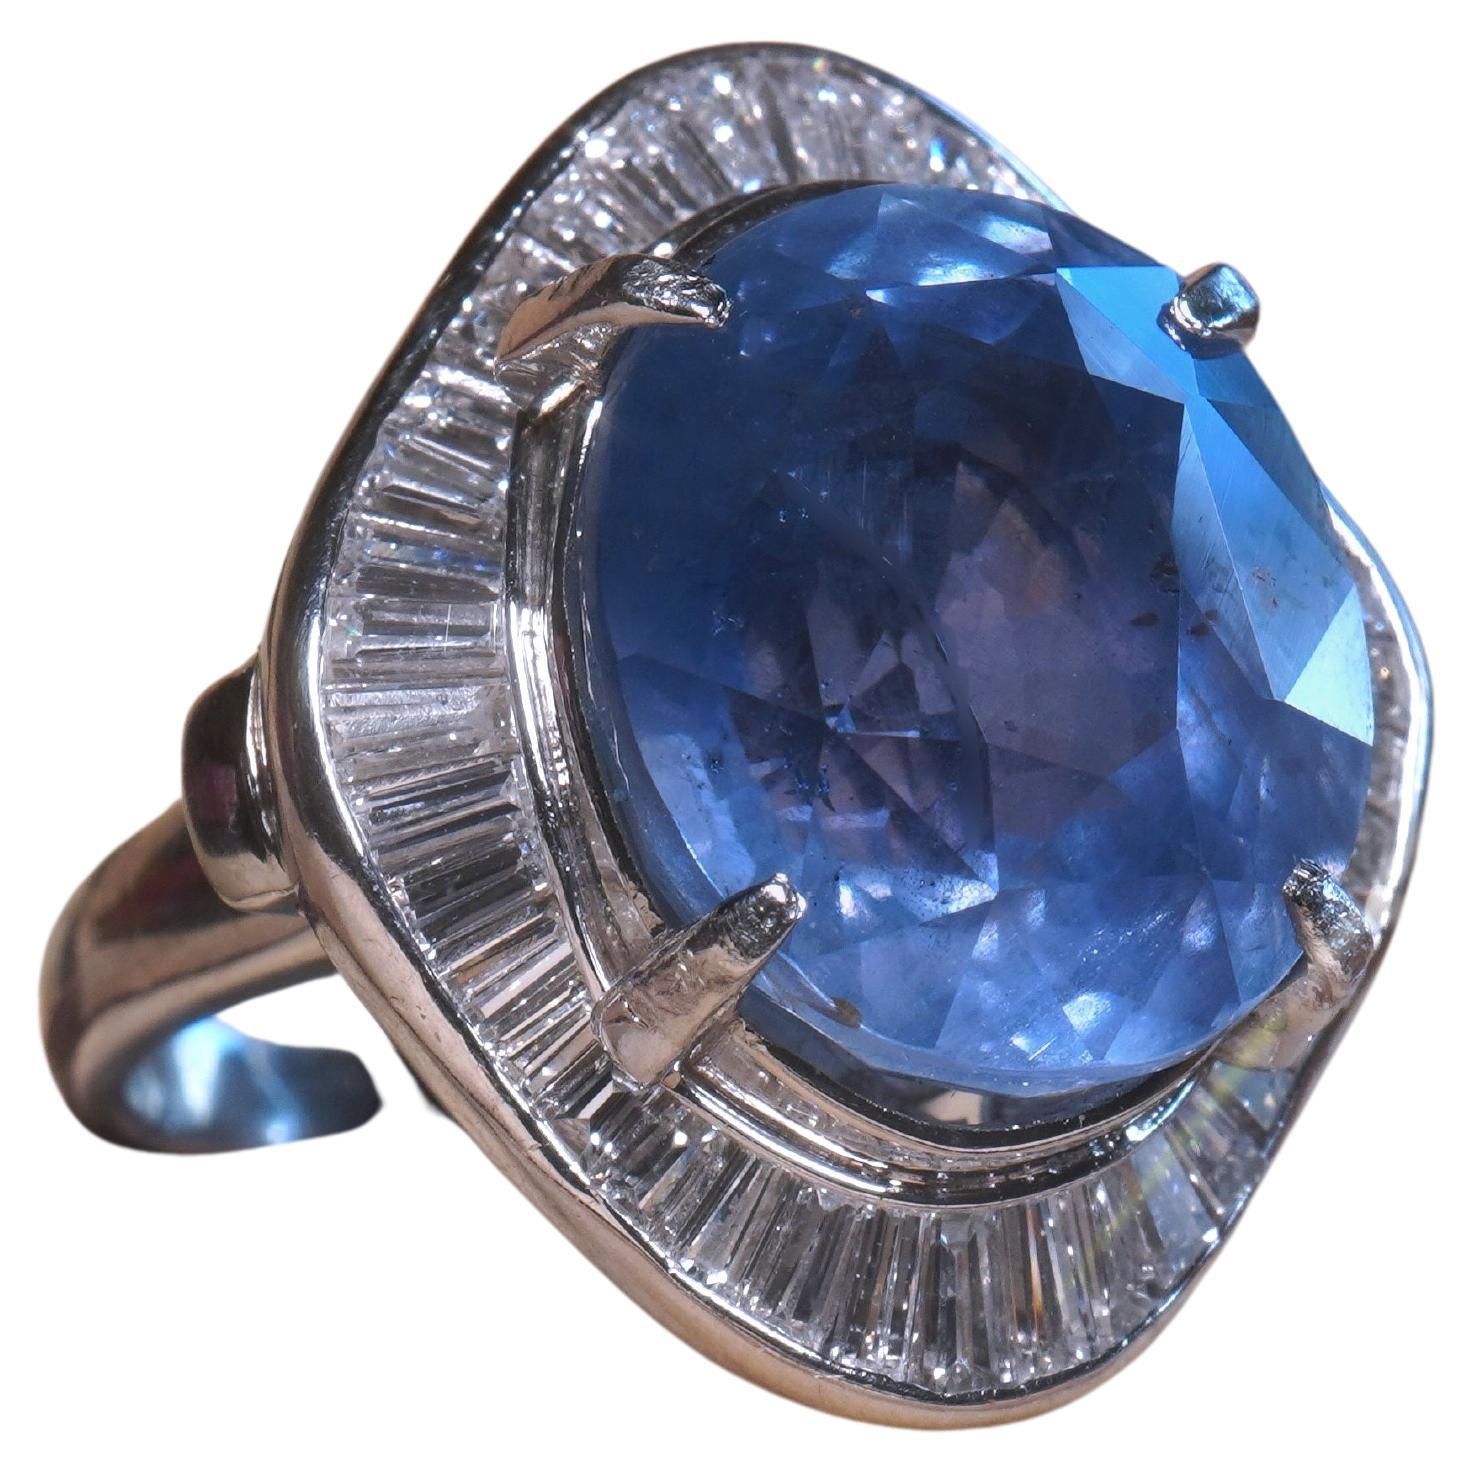 Old South Jewels proudly presents...VINTAGE LUXURY... GIA CERTIFIED PLATINUM GIANT 19.92 CARAT UNHEATED SAPPHIRE DIAMOND VINTAGE RING AND BOX.   VERY RARE 17.27 CARAT TRANSPARENT BLUE GIA CERTIFIED RARE NO HEAT NATURAL CEYLON SAPPHIRE.   (This